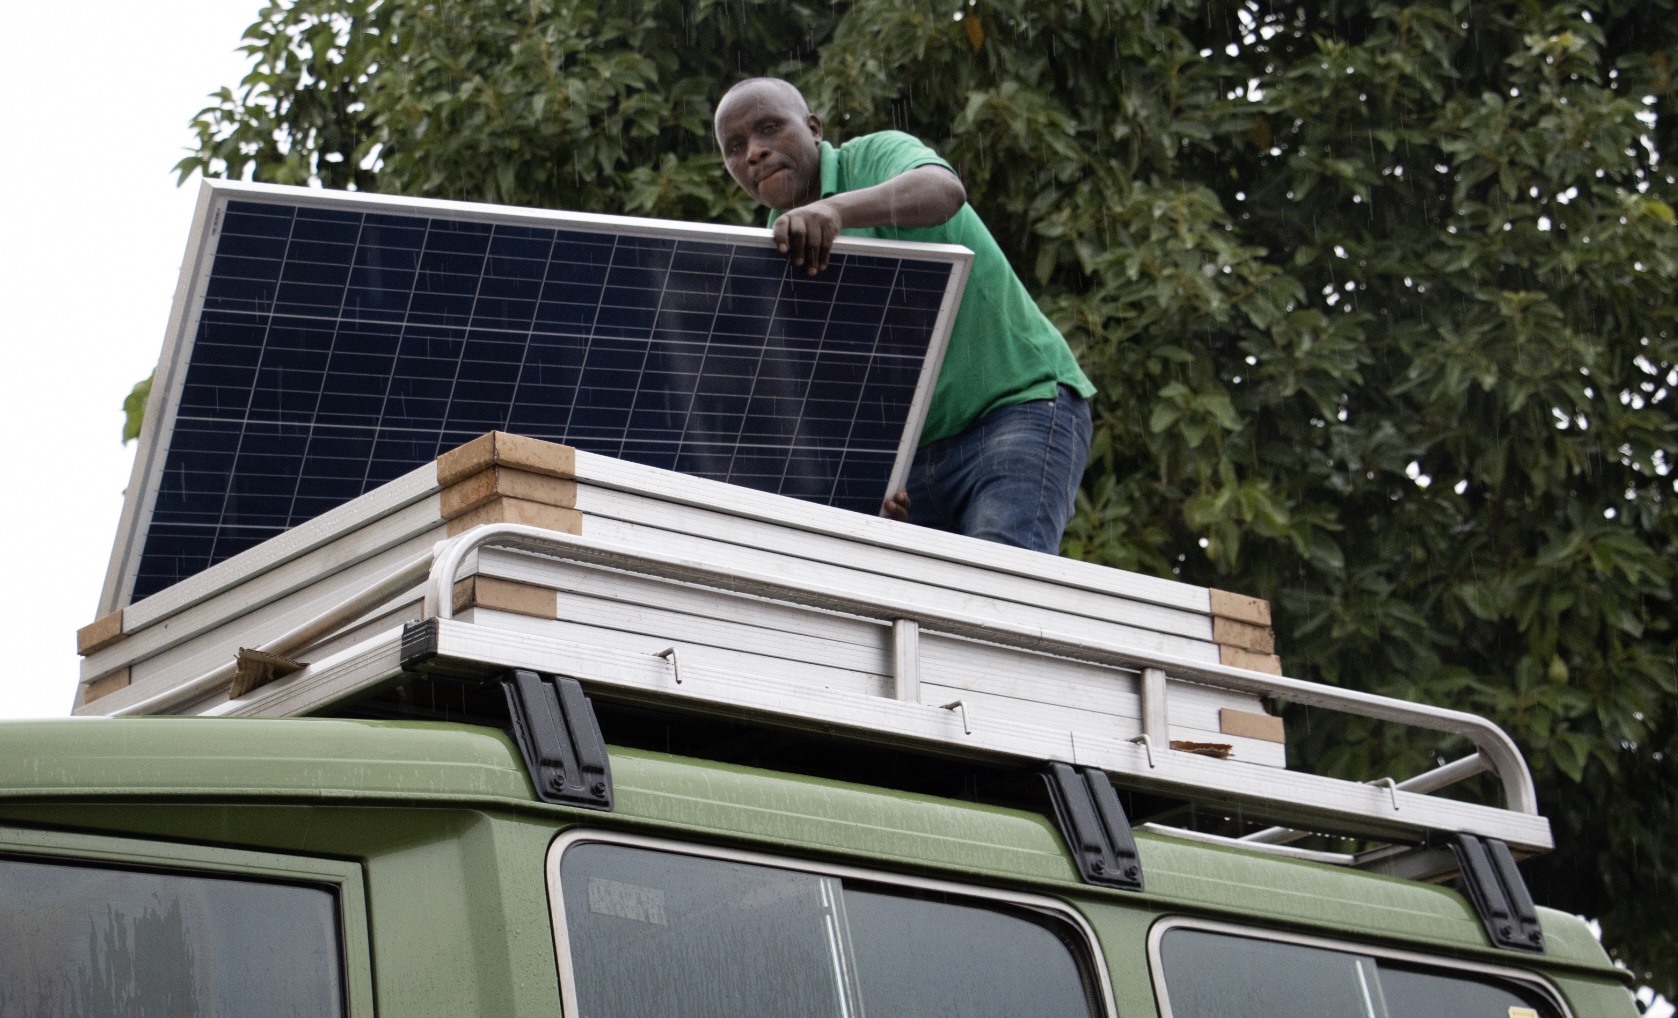 Solar panels being loaded onto the Green Machine roof